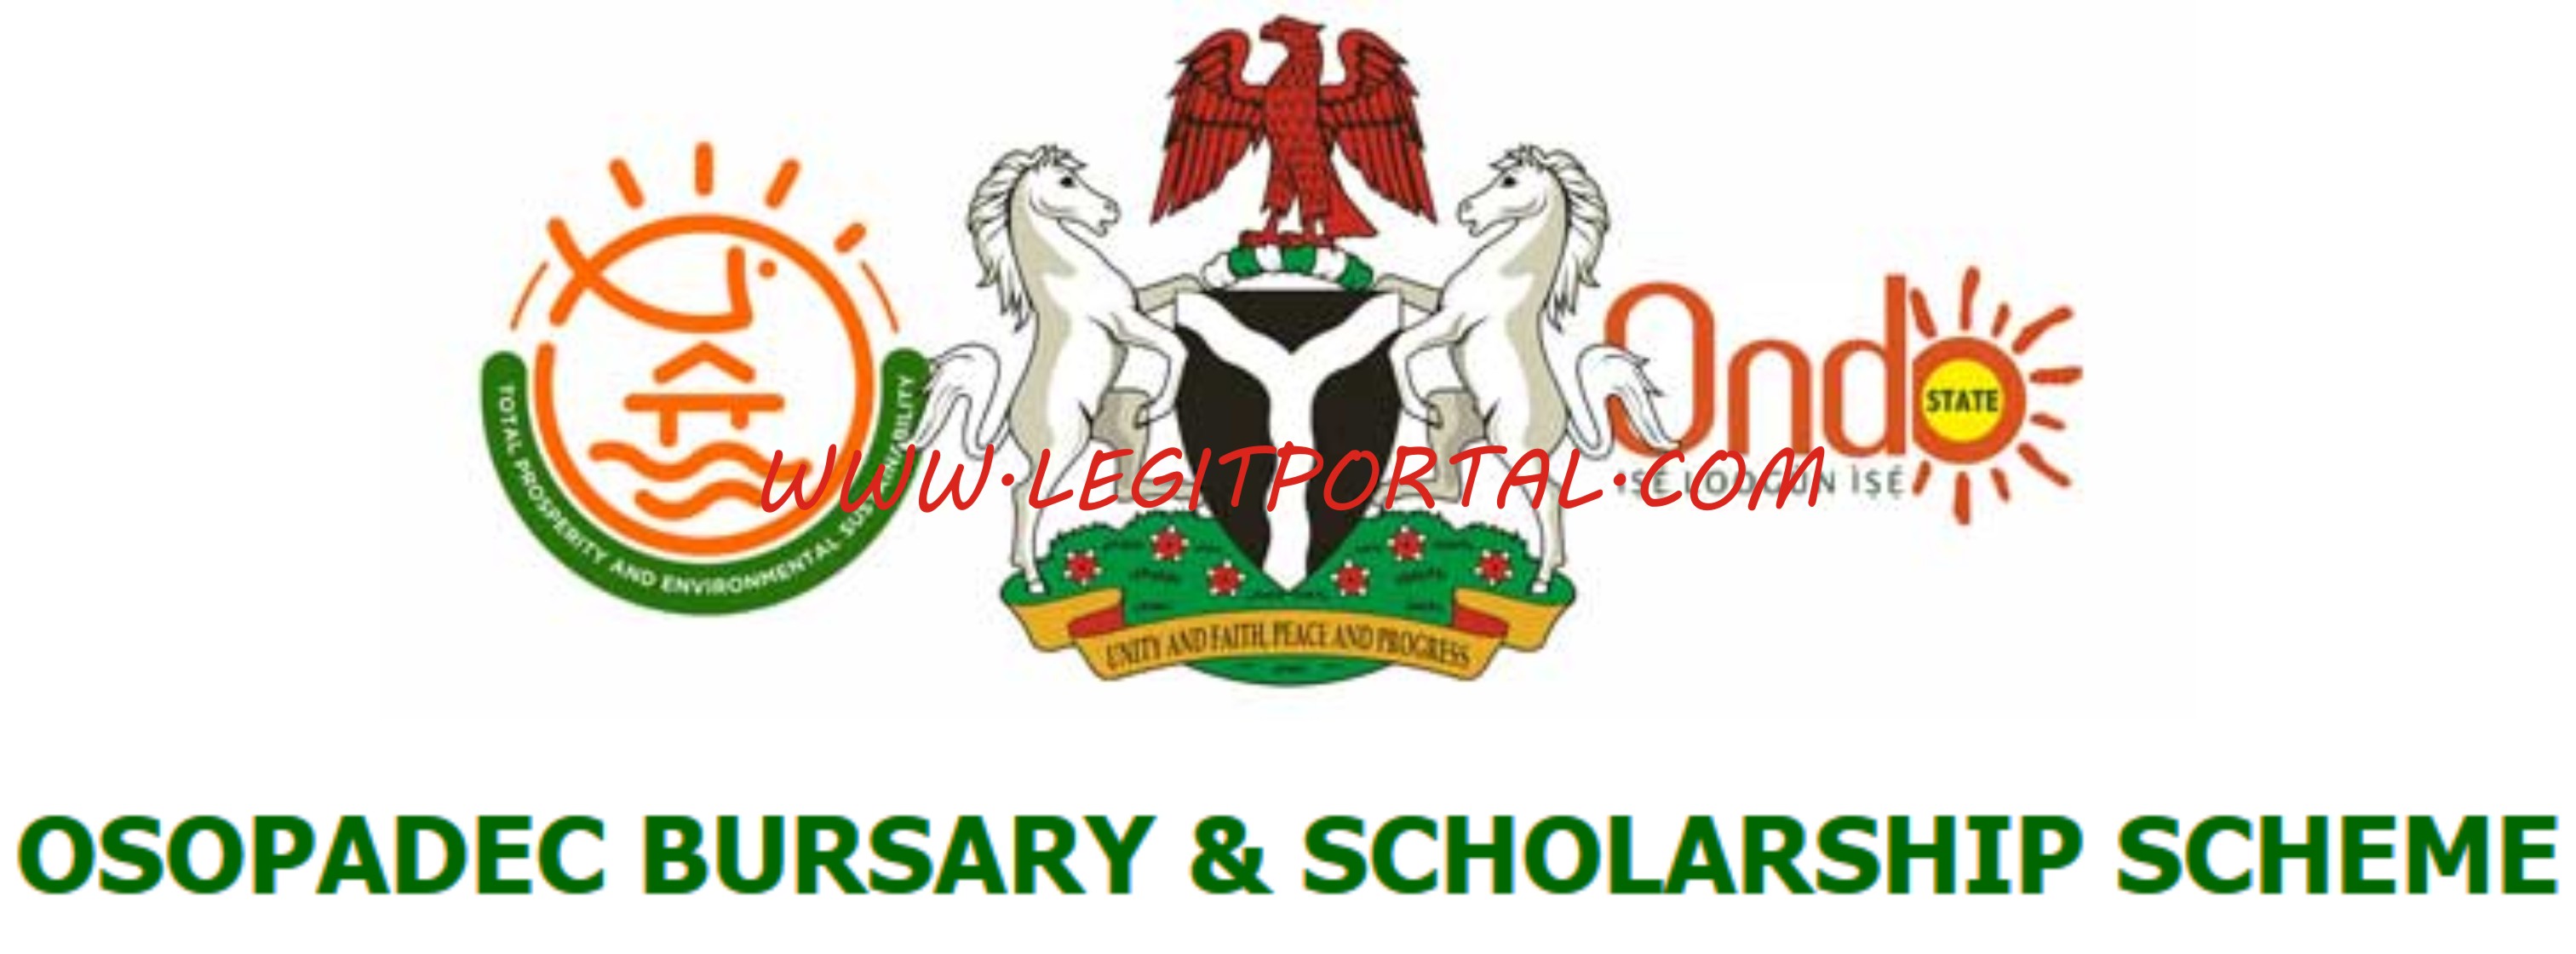 How to apply for OSOPADEC Bursary and Scholarship 2021/2022 Application and Closing Date